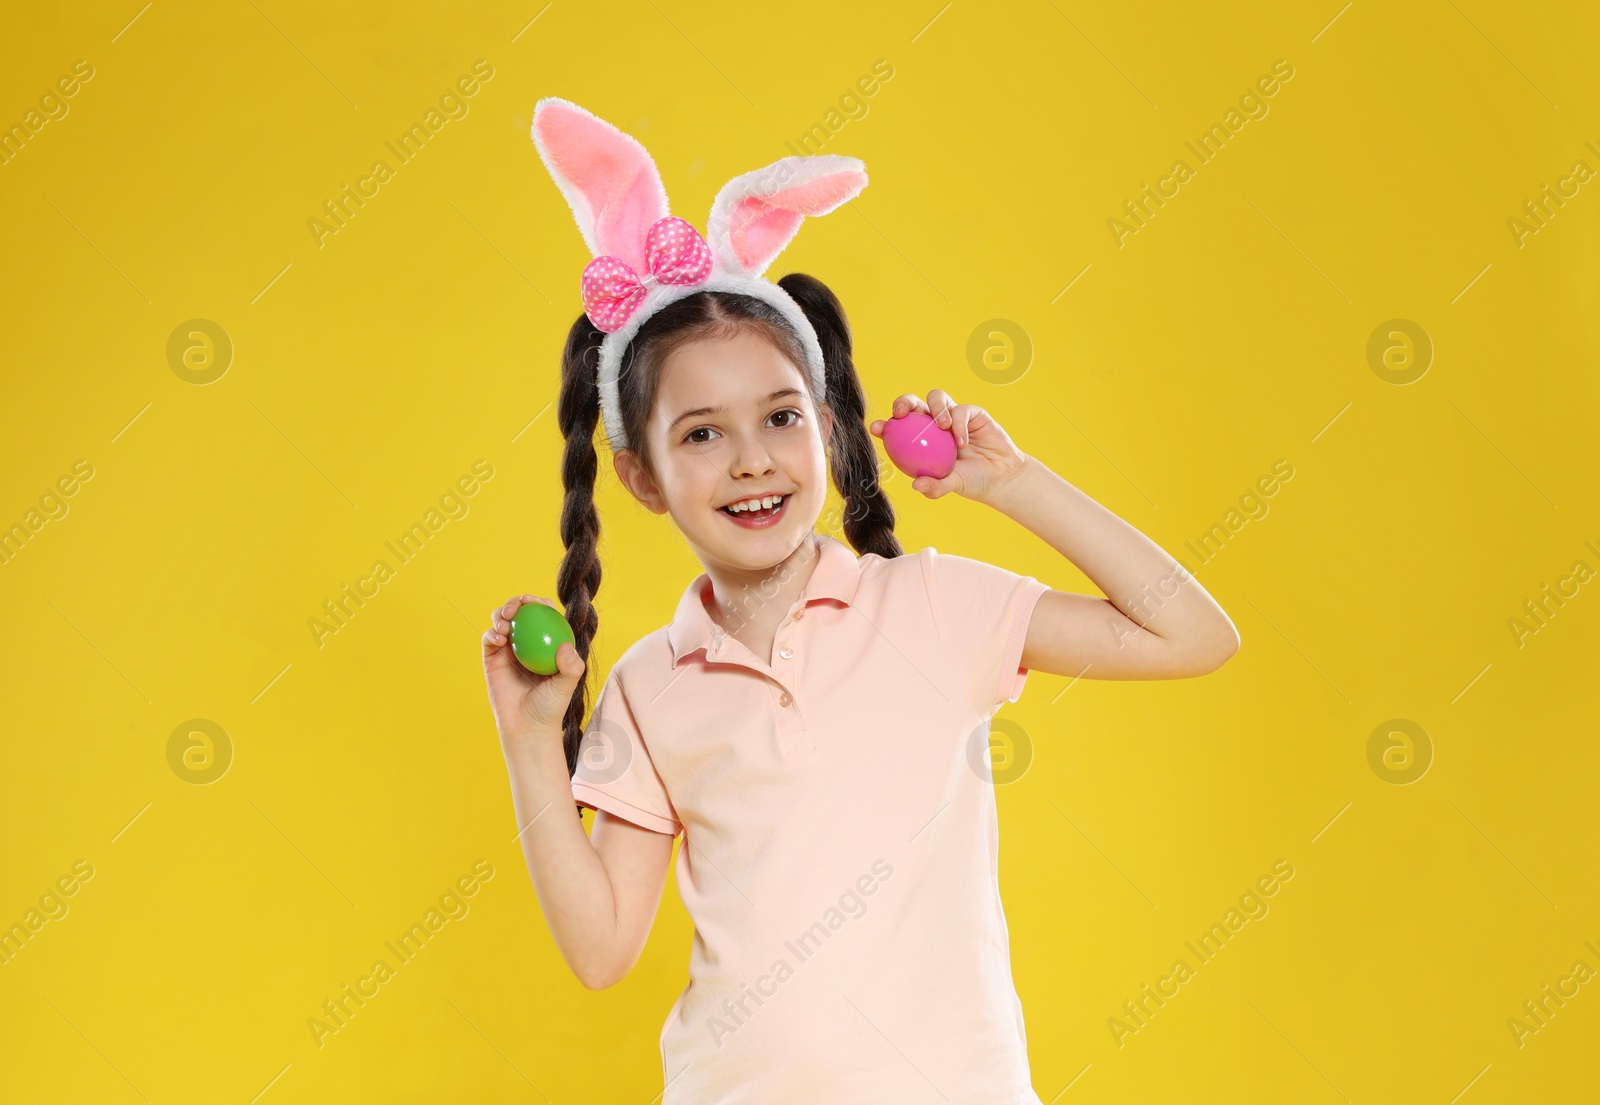 Photo of Little girl in bunny ears headband holding Easter eggs on color background